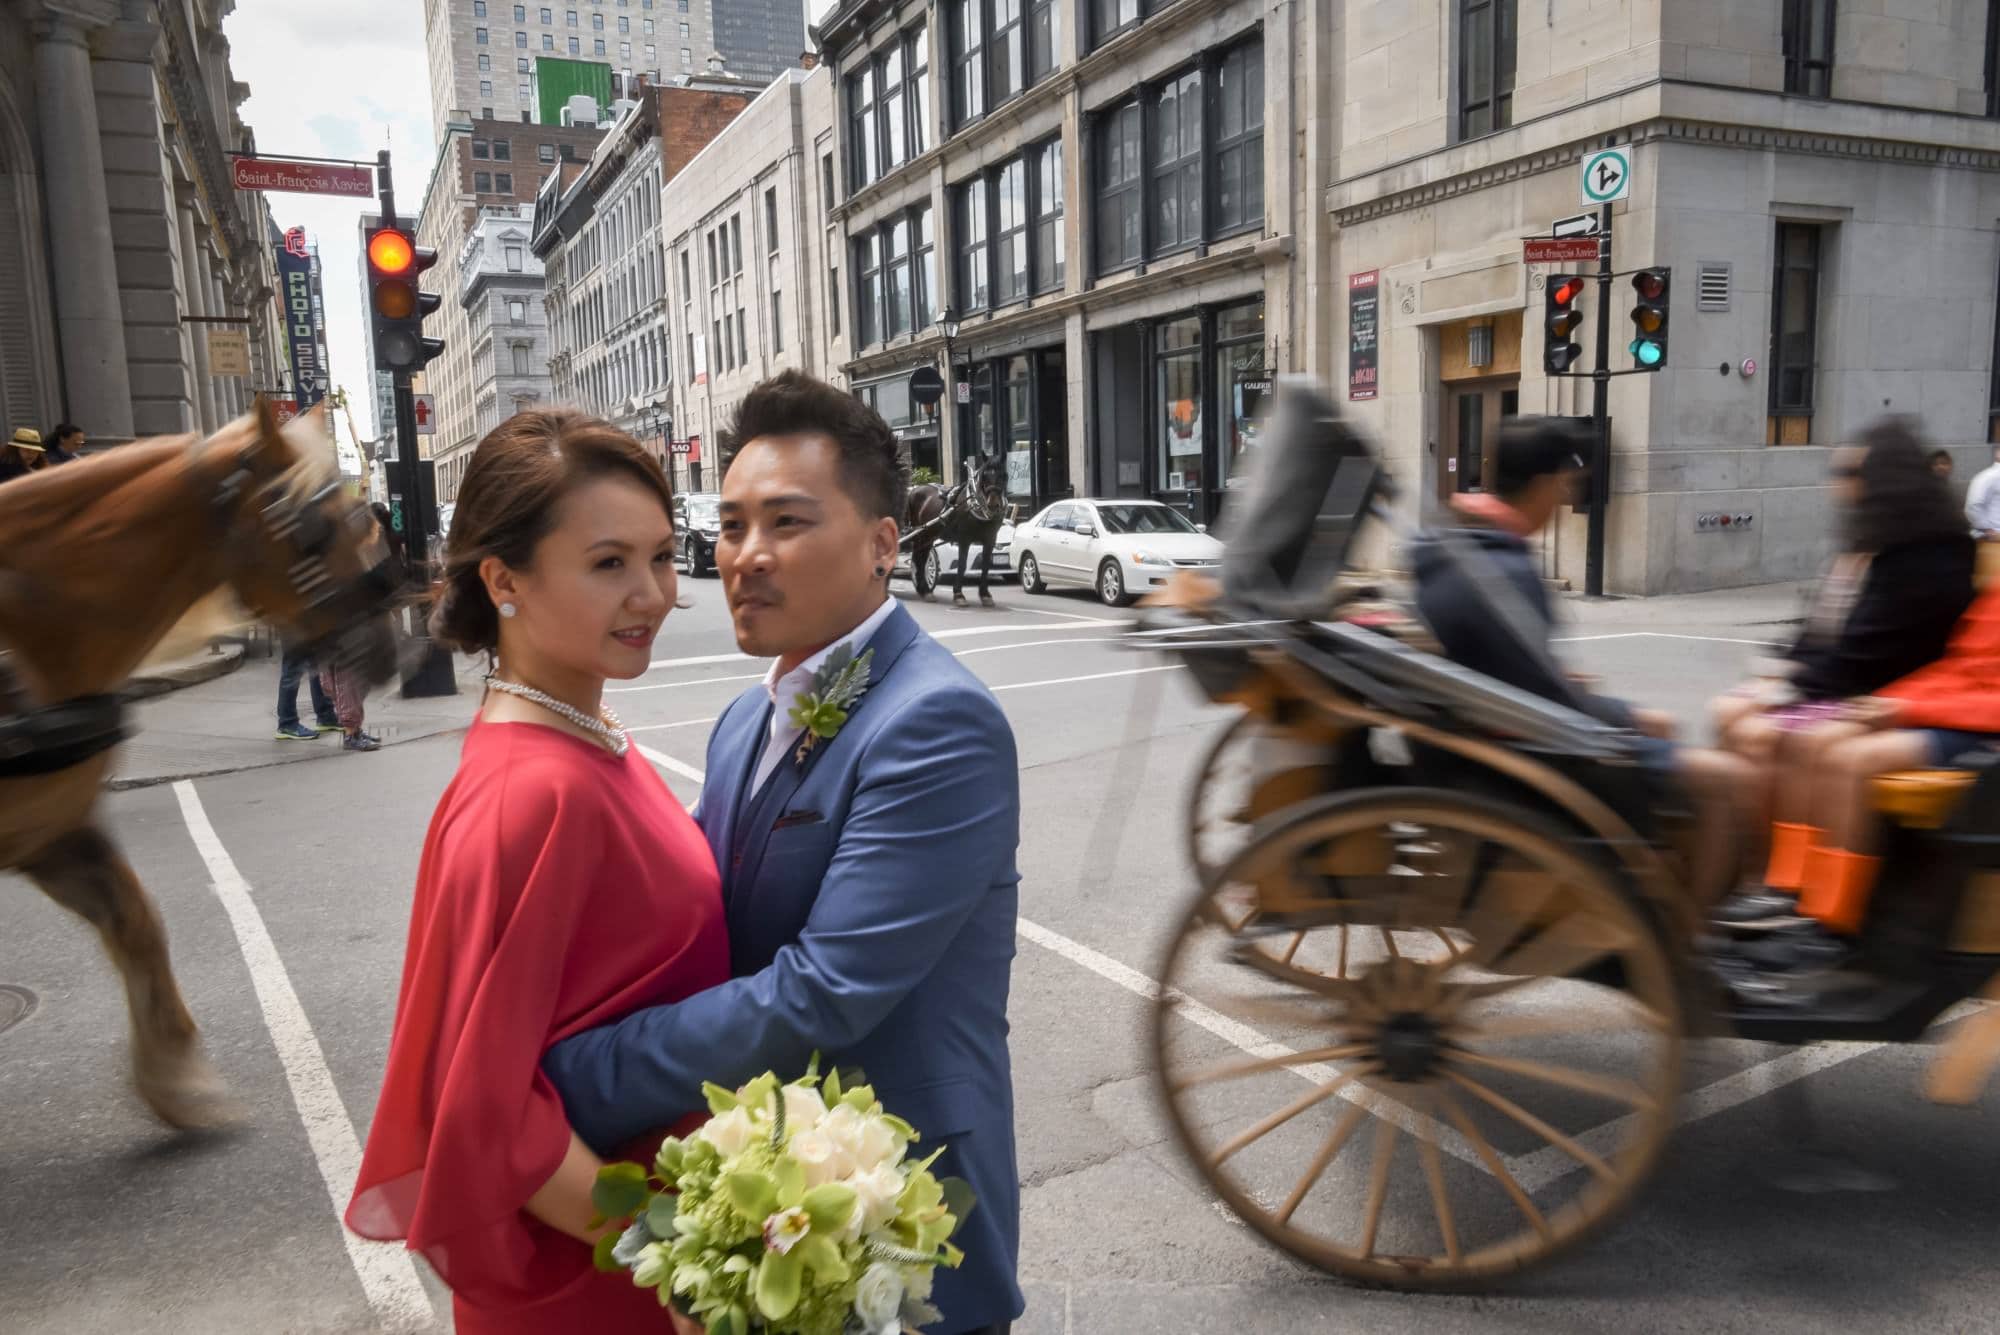 michelle evan couple engagement session casual style stylish love montreal alain simon fleurs asian prewedding photoshoot suit blue red dress matching pearl outfit horse carriages movement